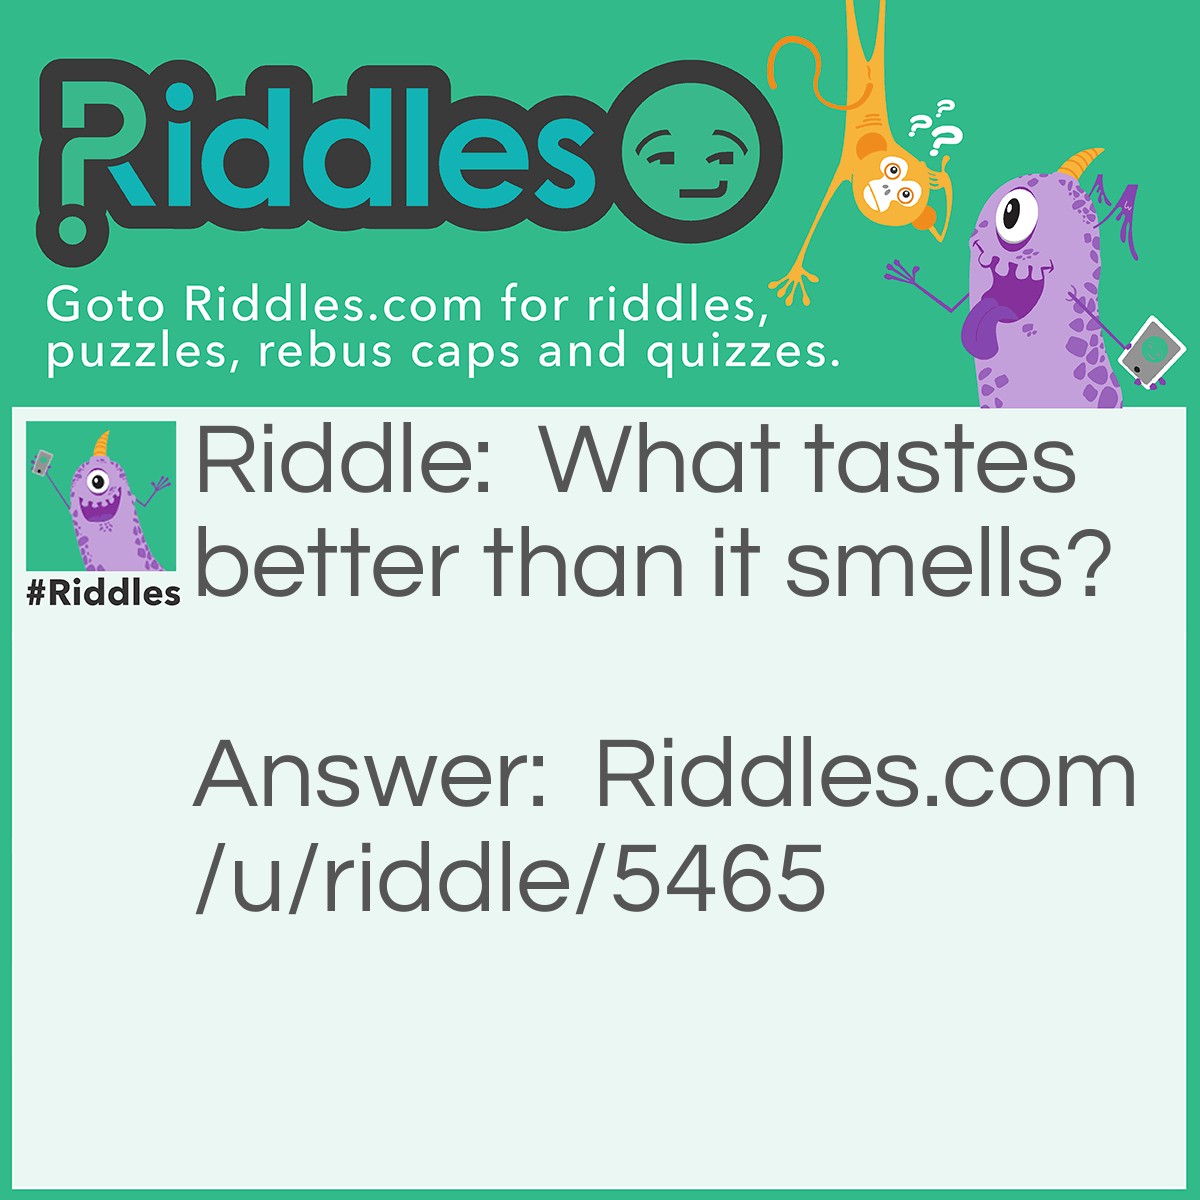 Riddle: What tastes better than it smells? Answer: A tongue!